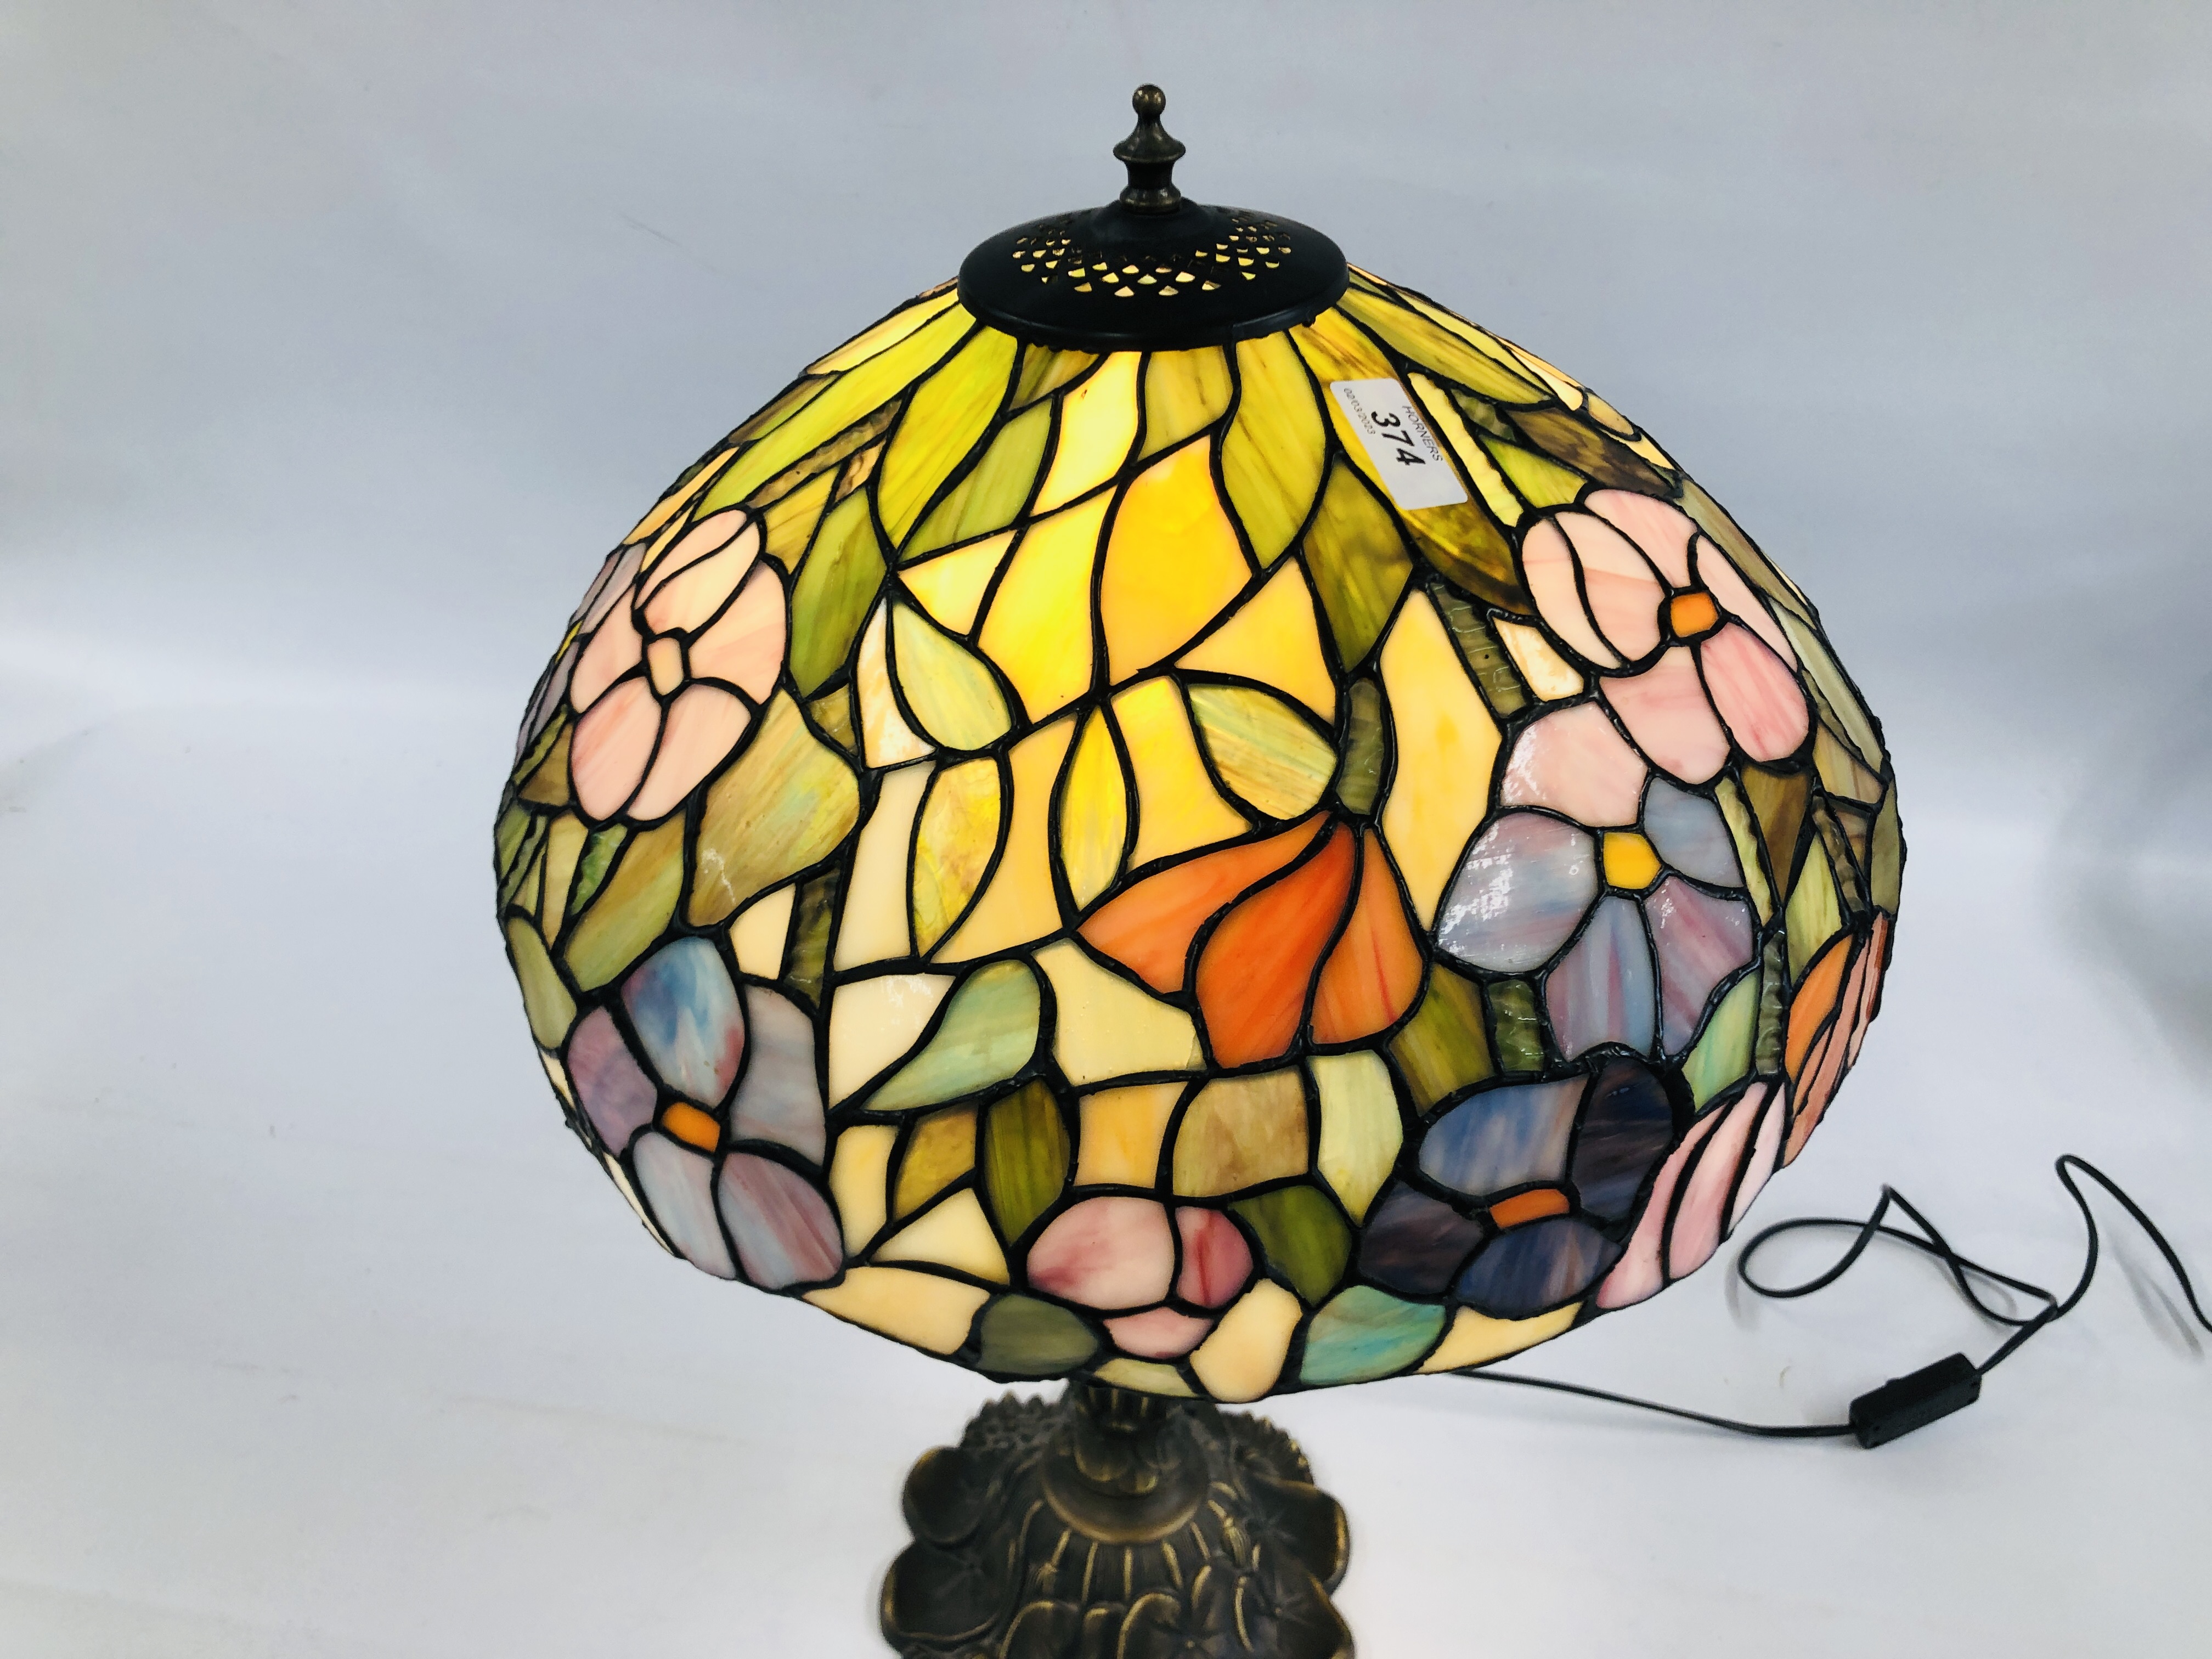 A REPRODUCTION TIFFANY INSPIRED STAINED GLASS TABLE LAMP AND SHADE - SOLD AS SEEN. - Image 2 of 8